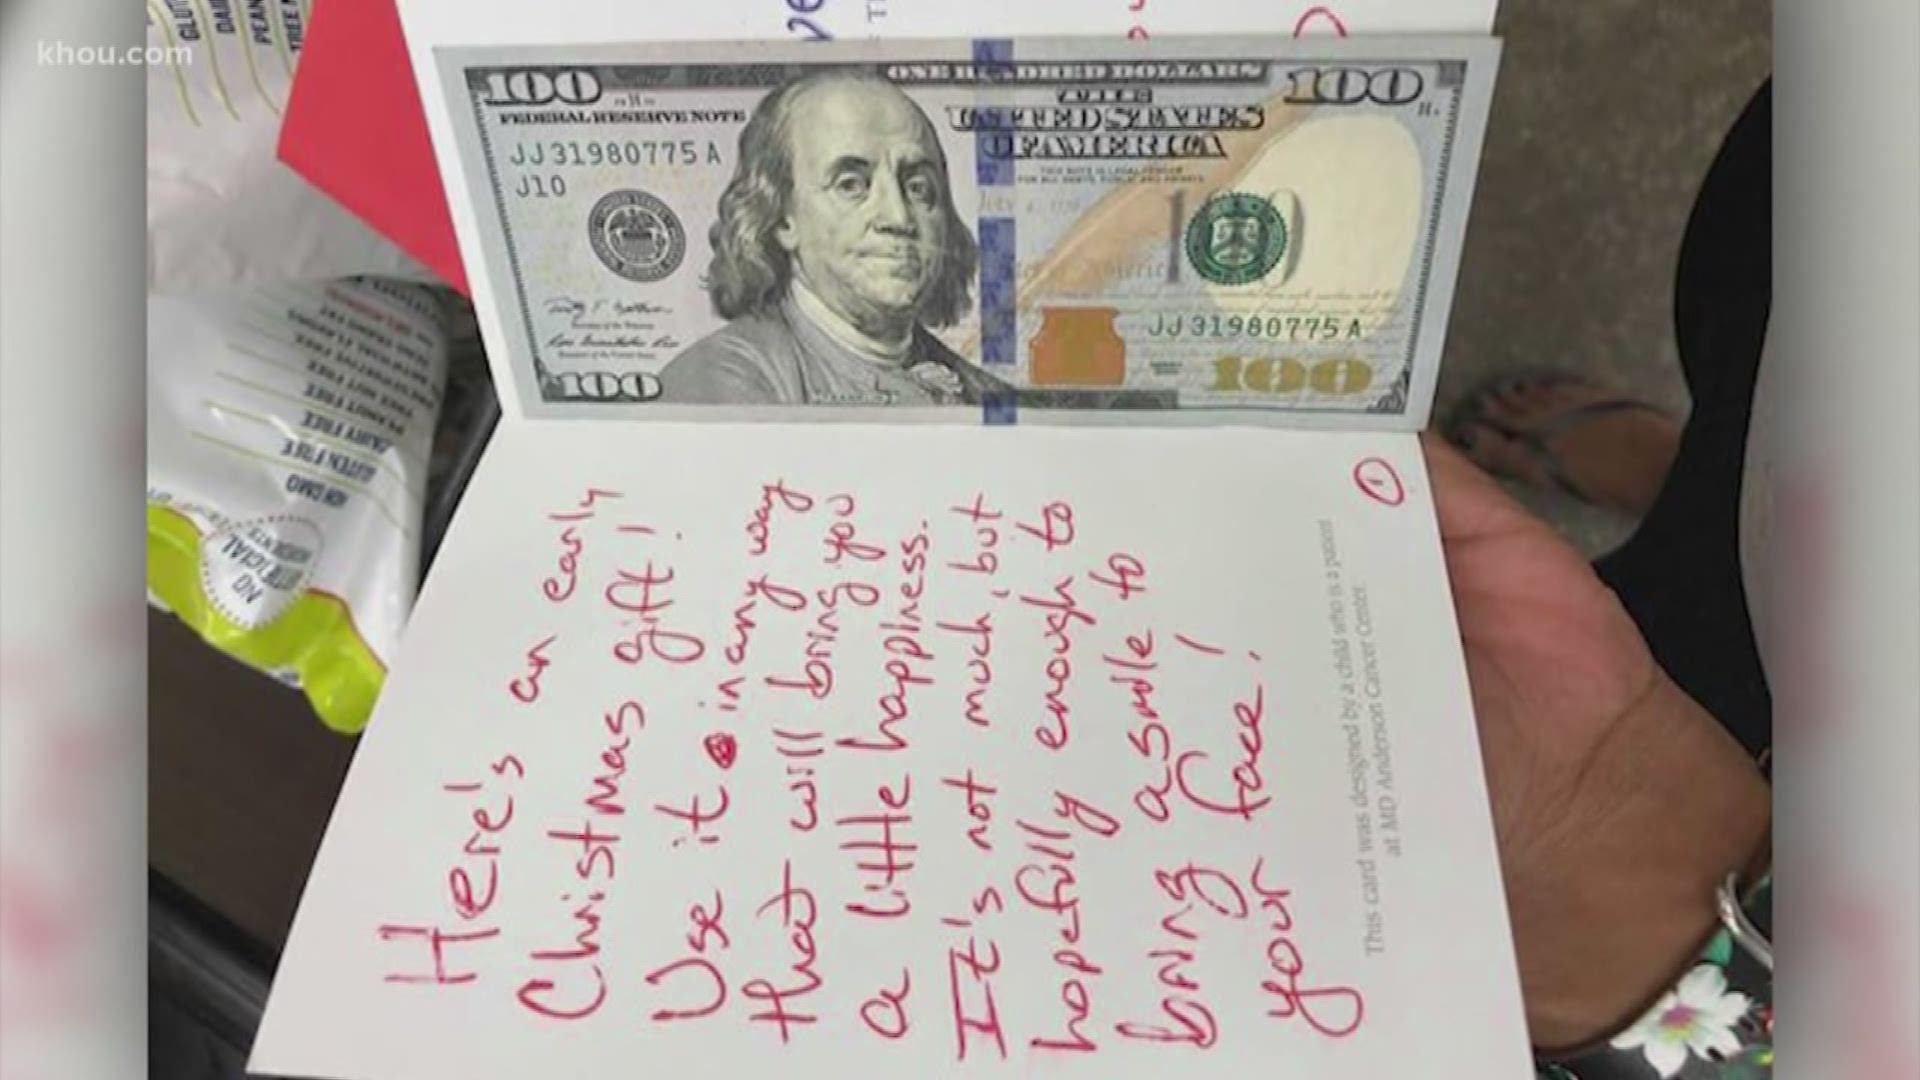 A woman shopping in a Cypress Kroger supermarket was gifted $100 from a random man in a red hoodie. He left the money in a card and wrote, "Here's an early Christmas gift!"